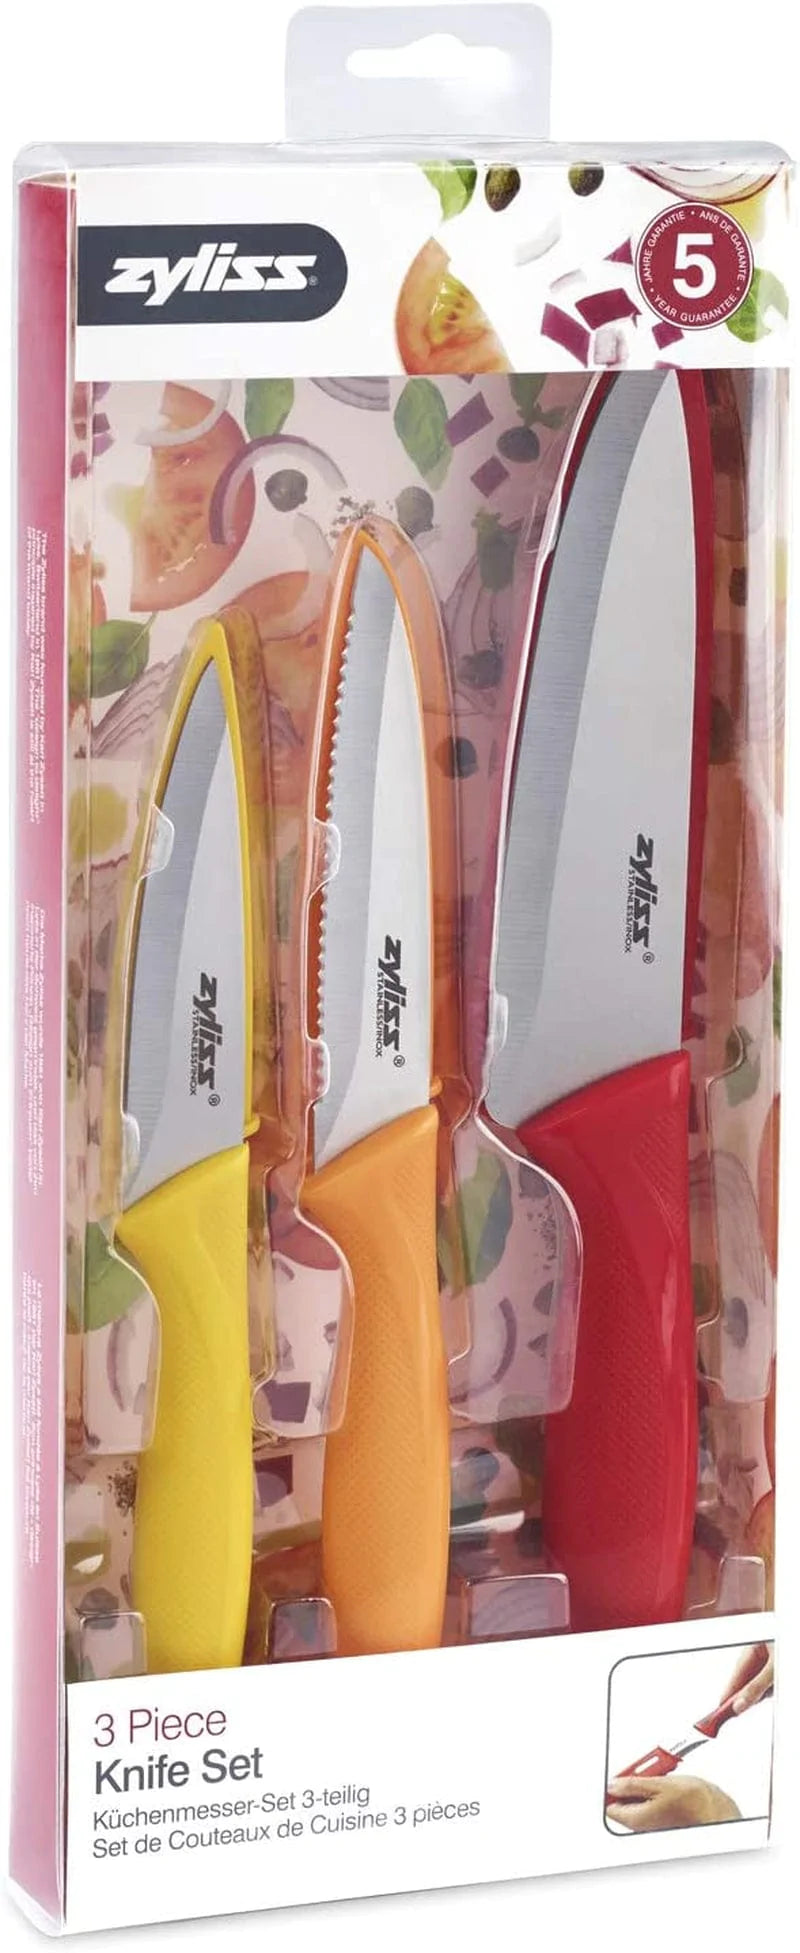 Zyliss 3-Piece Paring Knife Set - Stainless Steel Knife Set - Small Knife Set with Knife Sheaths - Travel Knife Set with Safety Kitchen Blade Guards - Dishwasher & Hand Wash Safe - 3 Pieces